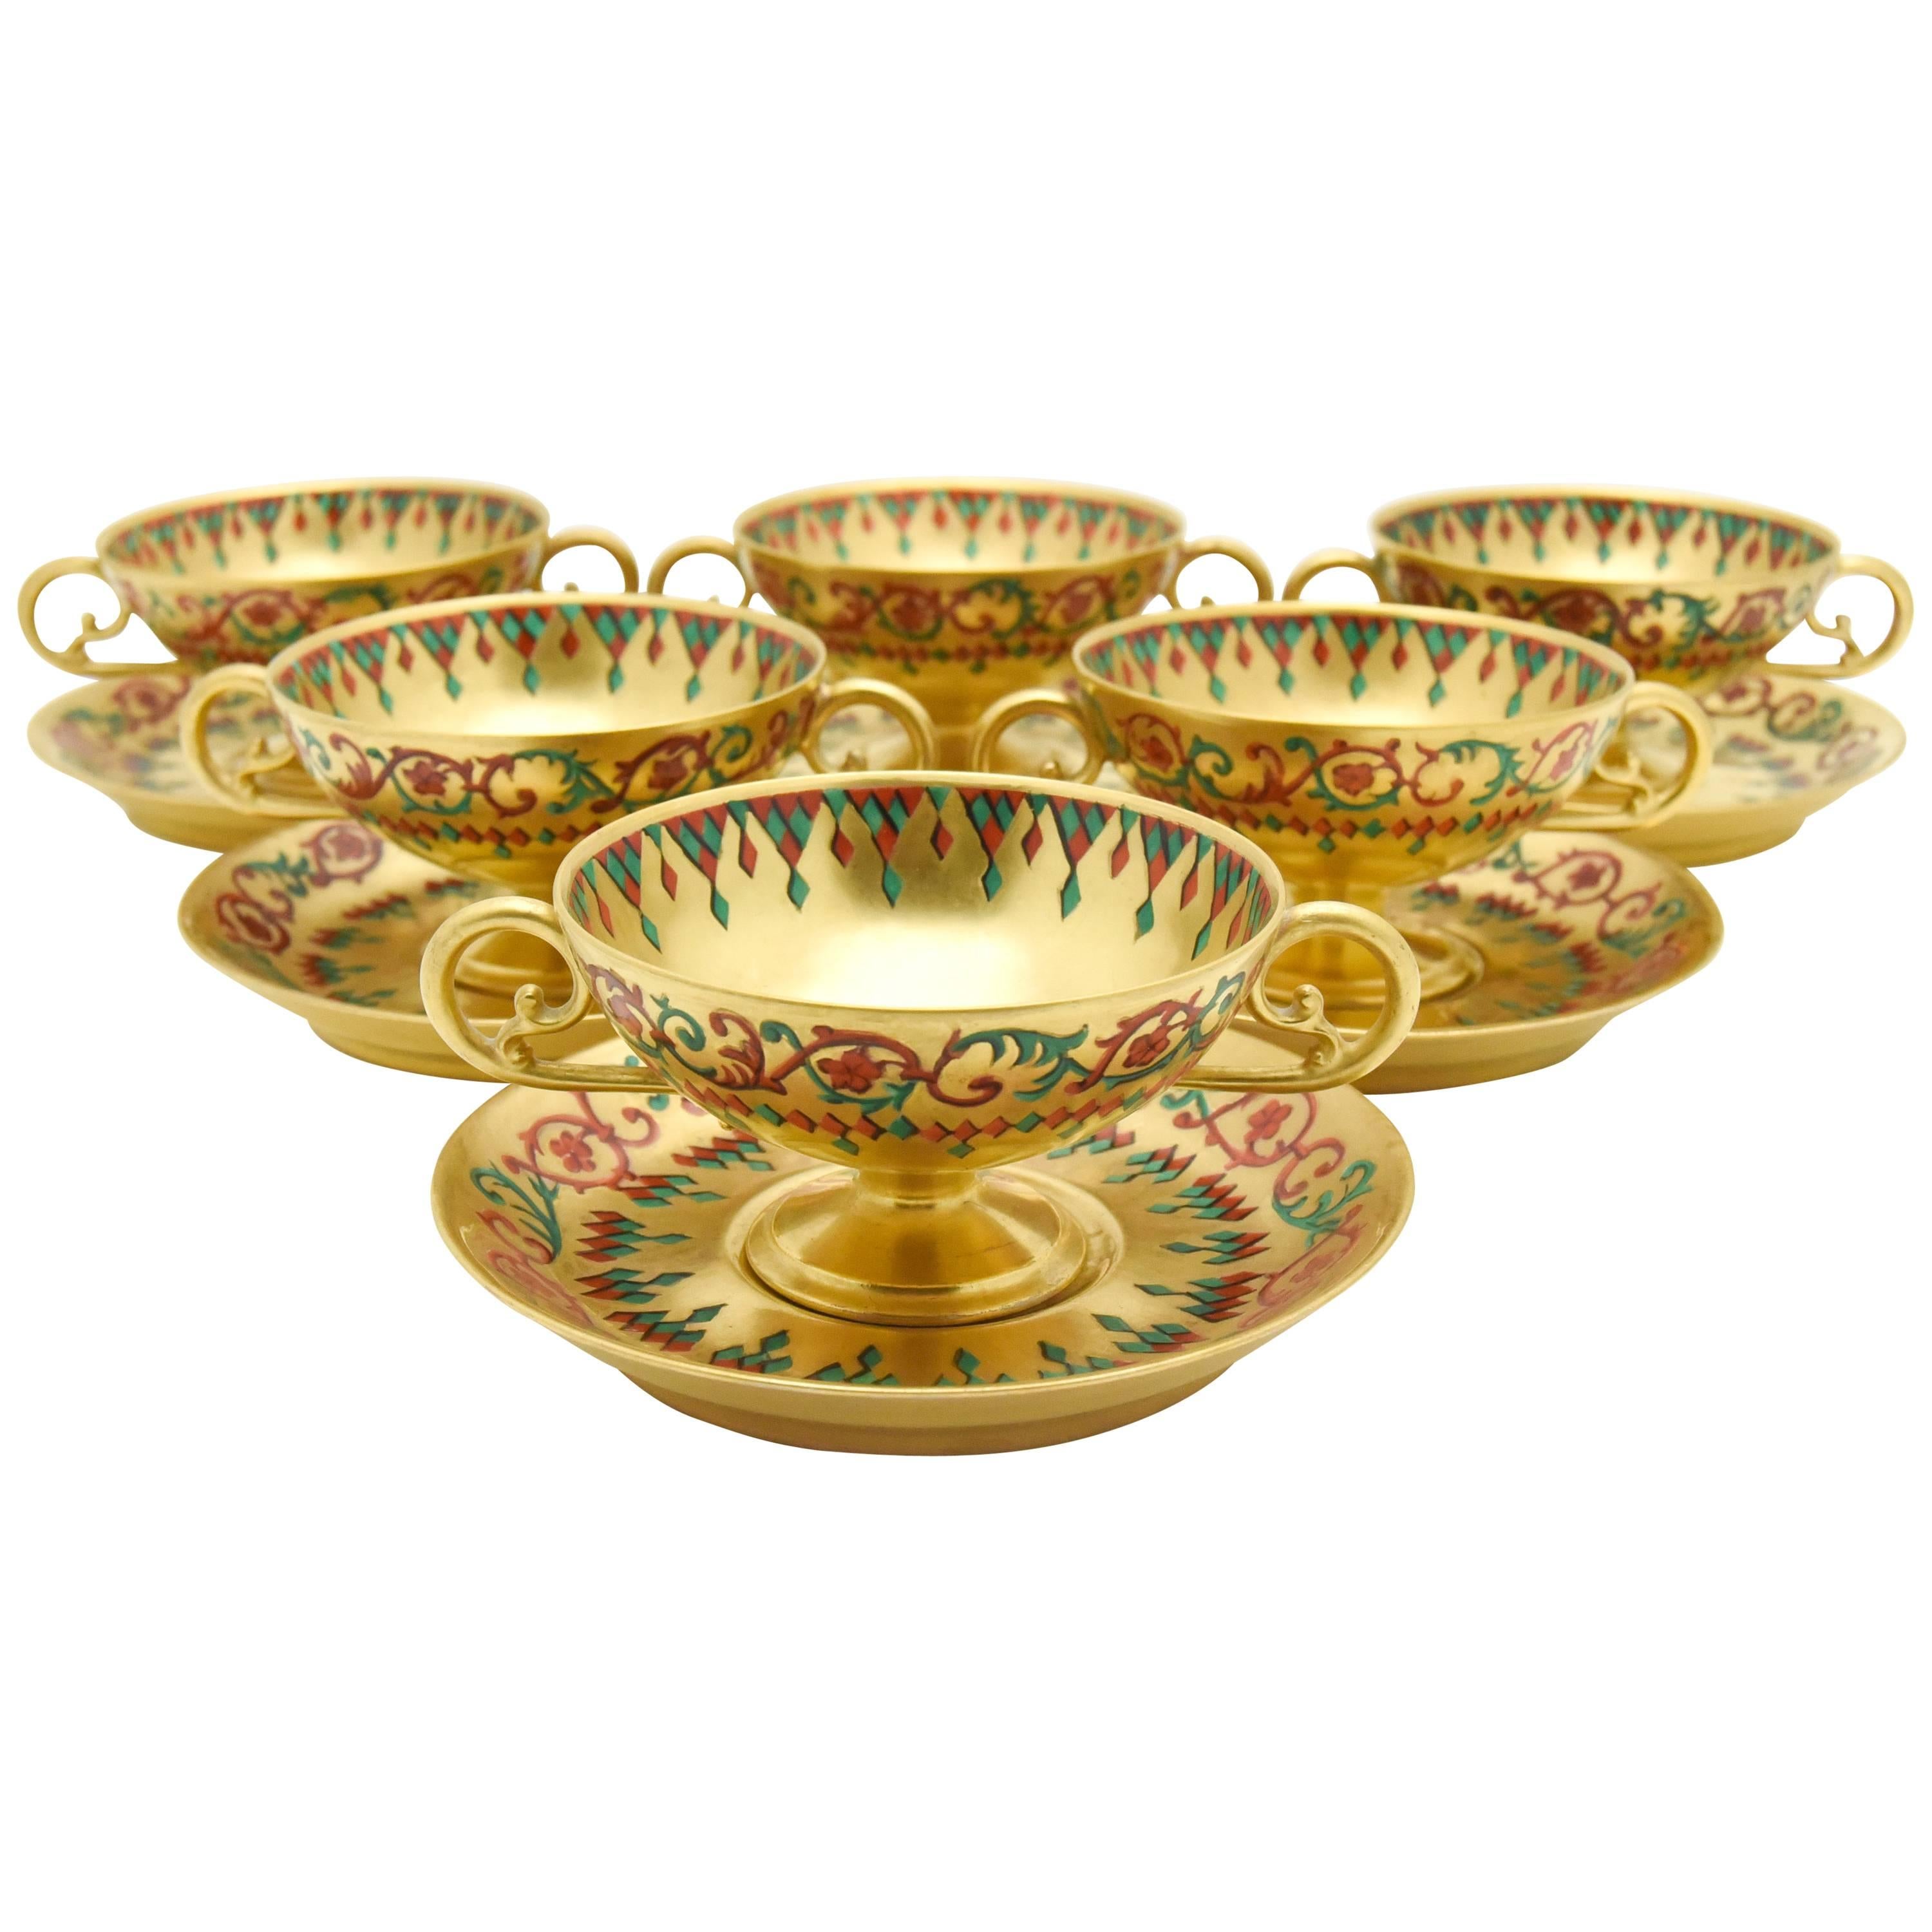 Six French Gold Footed Compotes and Saucers Persian Enameled Decoration, Signed